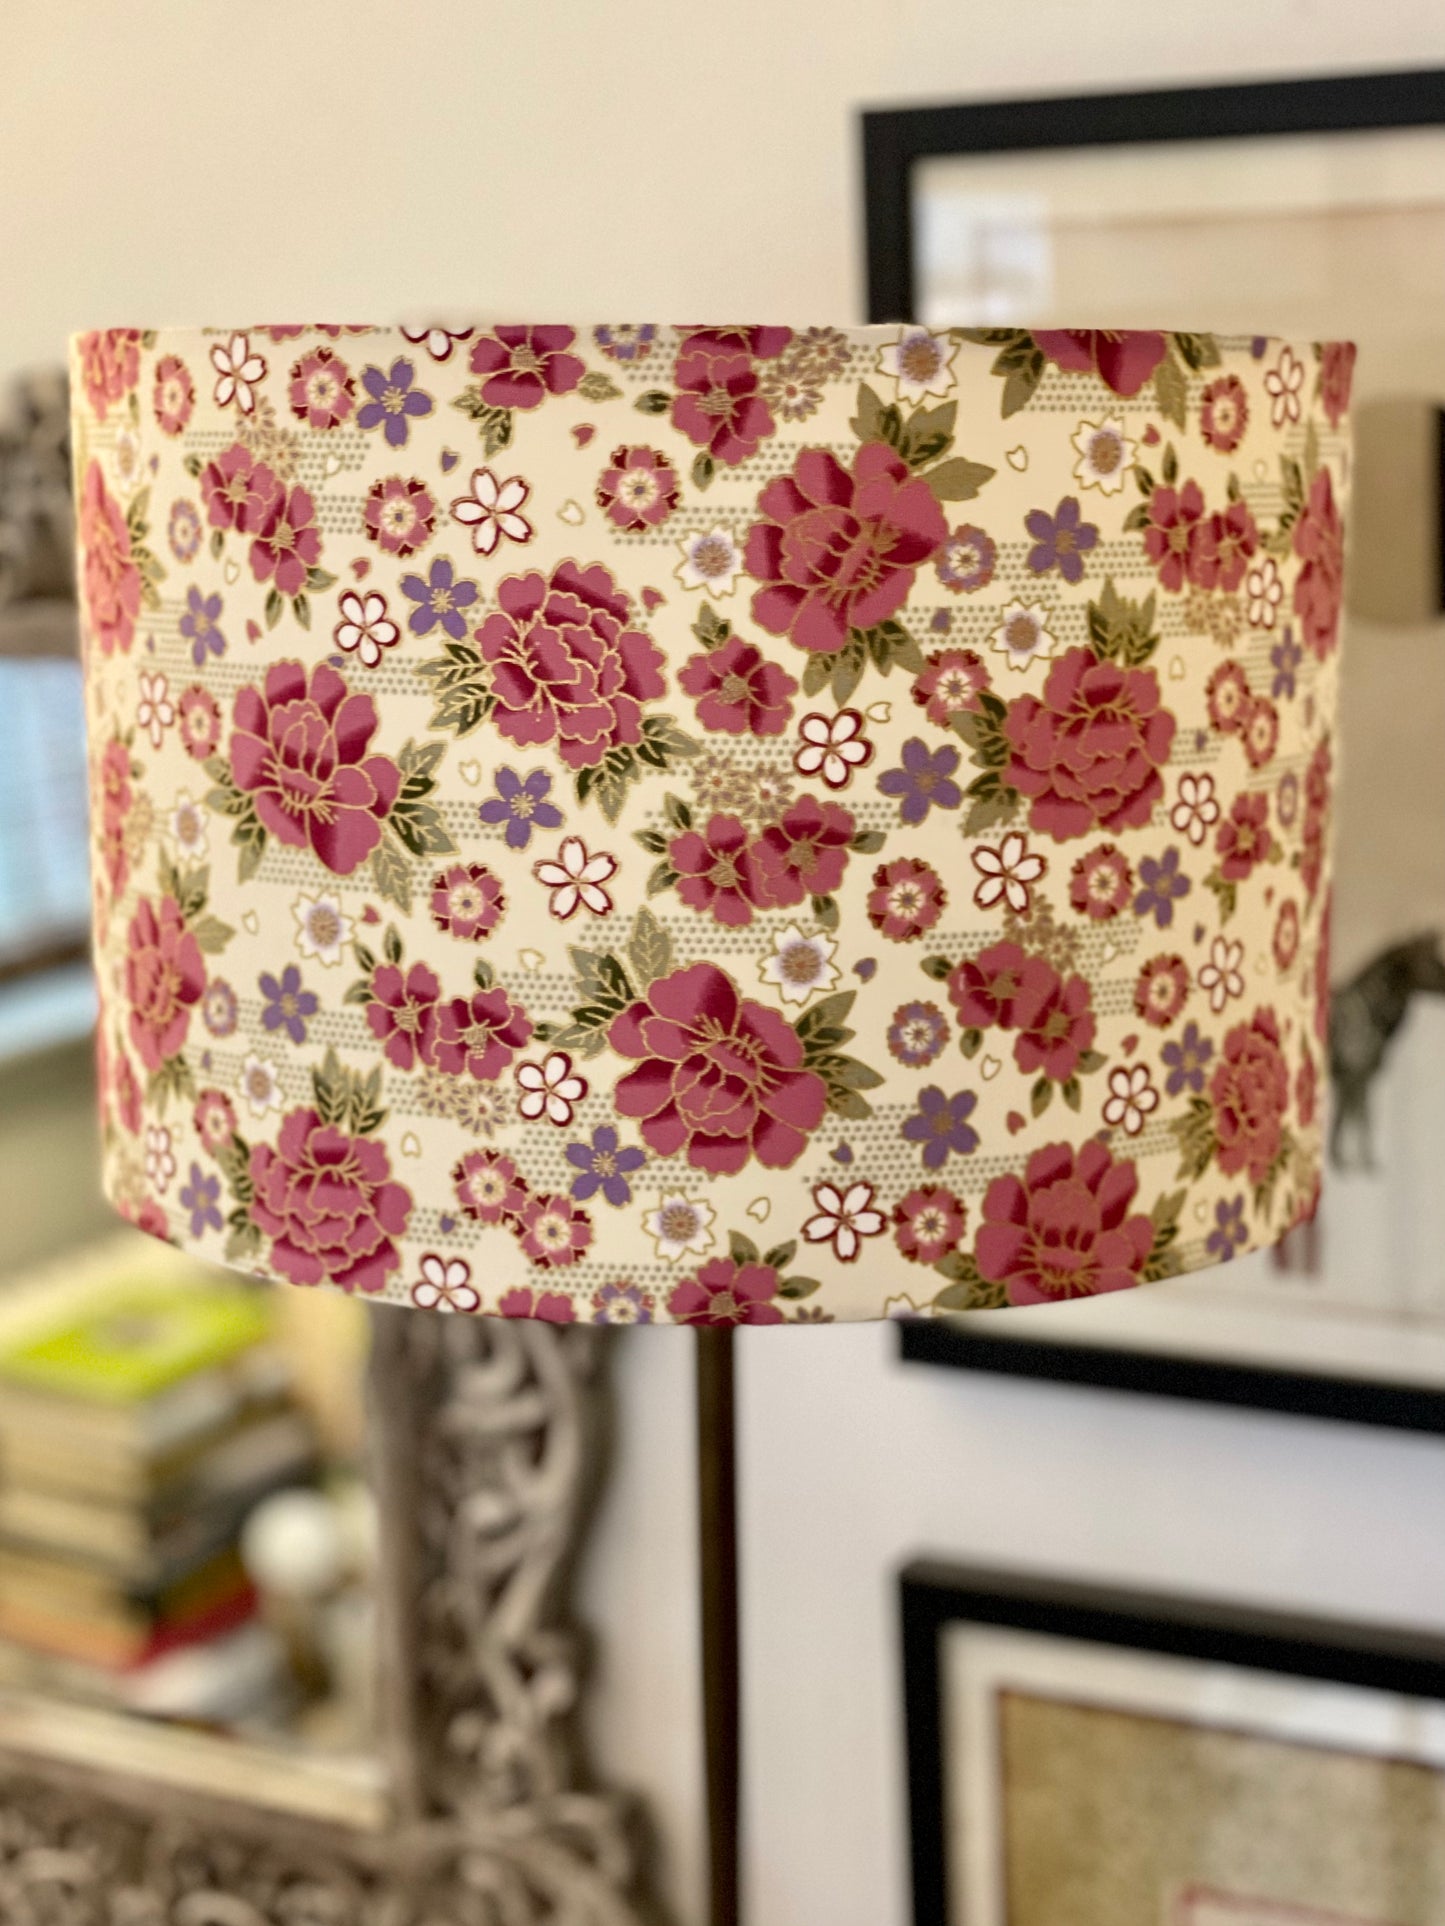 12 Inch Drum Shade. Traditional Japanese Fabric. Mulberry and Lilac Peony Motif on Cream with Gold Accents.